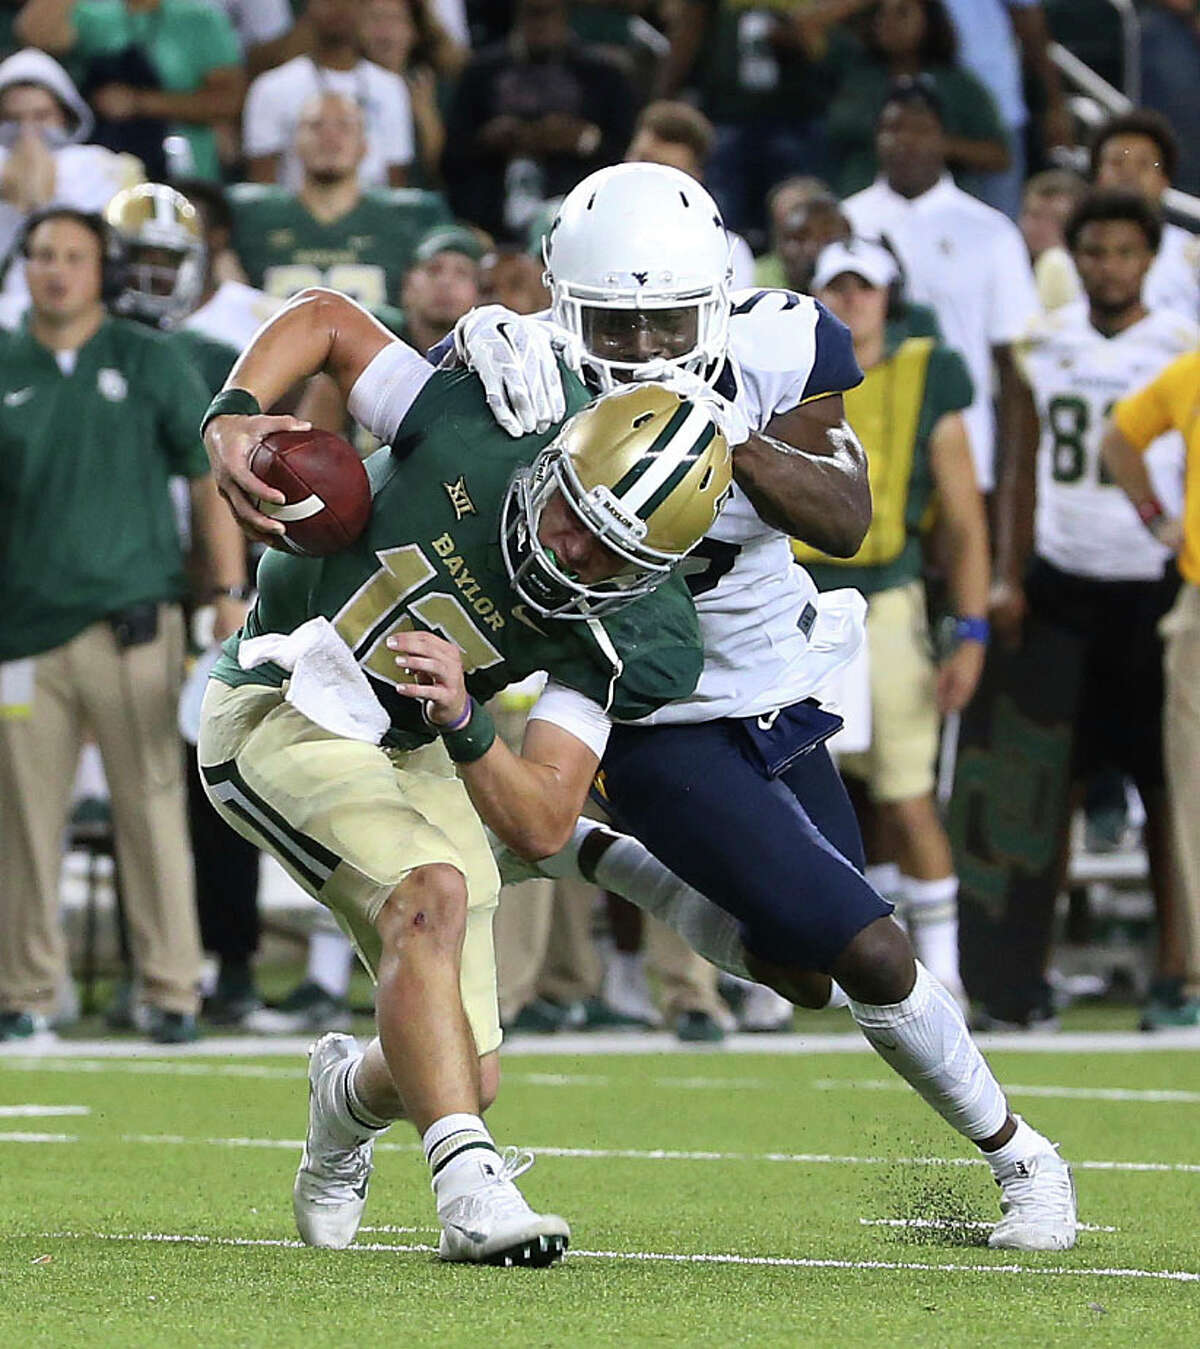 Baylor quarterback Charlie Brewer (12) is is sacked in the final minutes of the NCAA college football game by West Virginia linebacker Xavier Preston (5), Saturday, Oct. 21, 2017, in Waco, Texas. West Virginia won 38-36. (AP Photo/Jerry Larson)